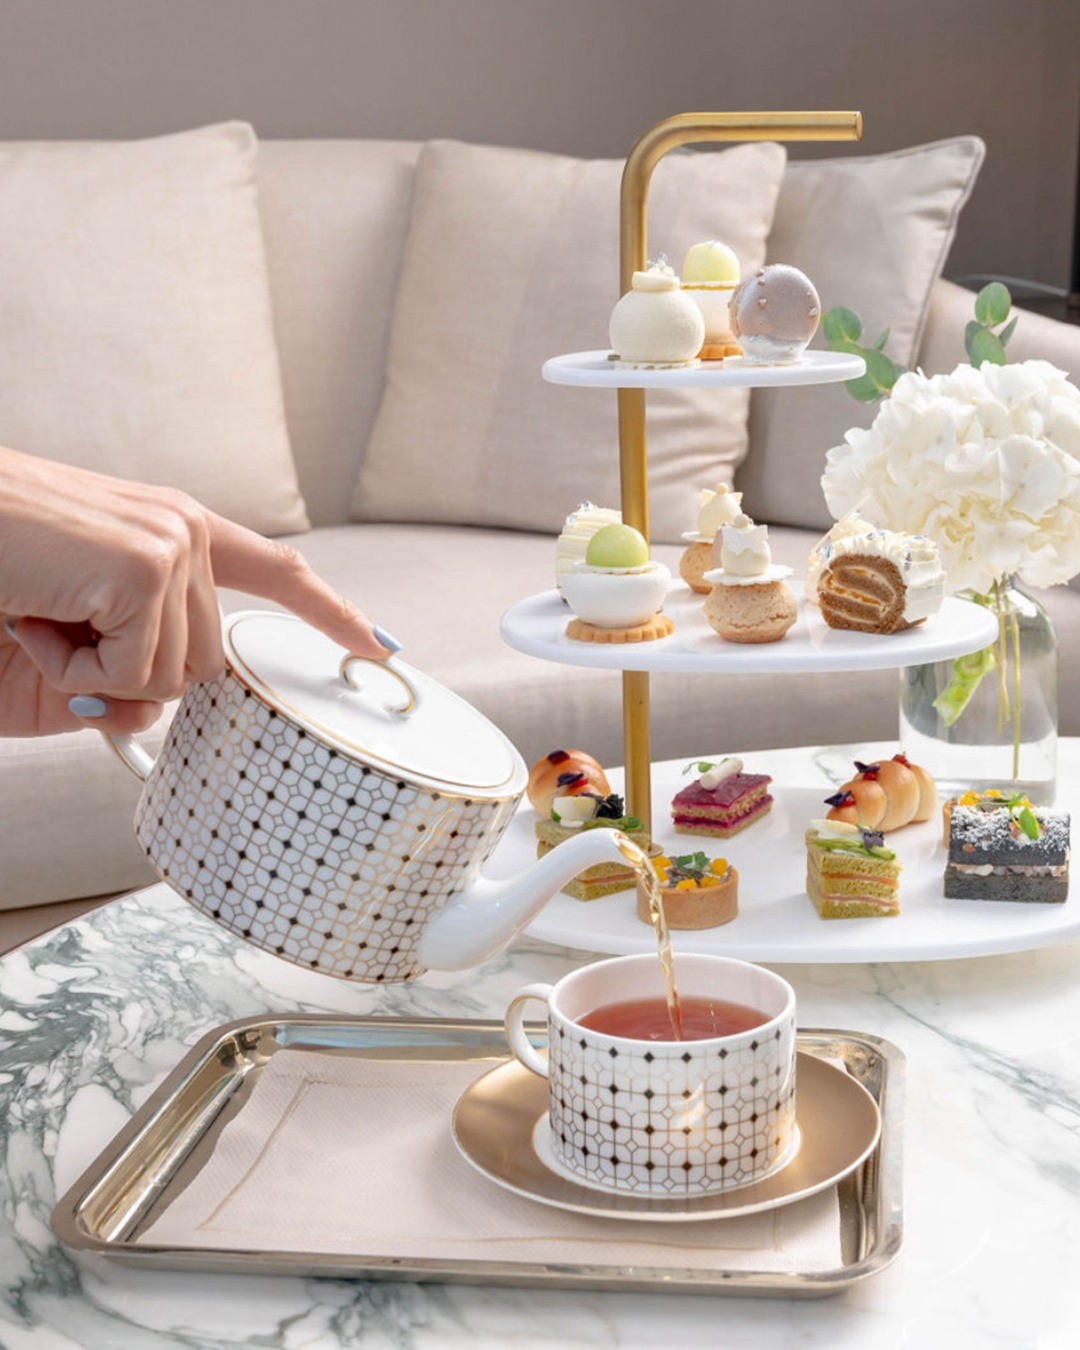 Escape the chill of winter and enjoy a cozy afternoon tea with views of the majestic Burj Khalifa at